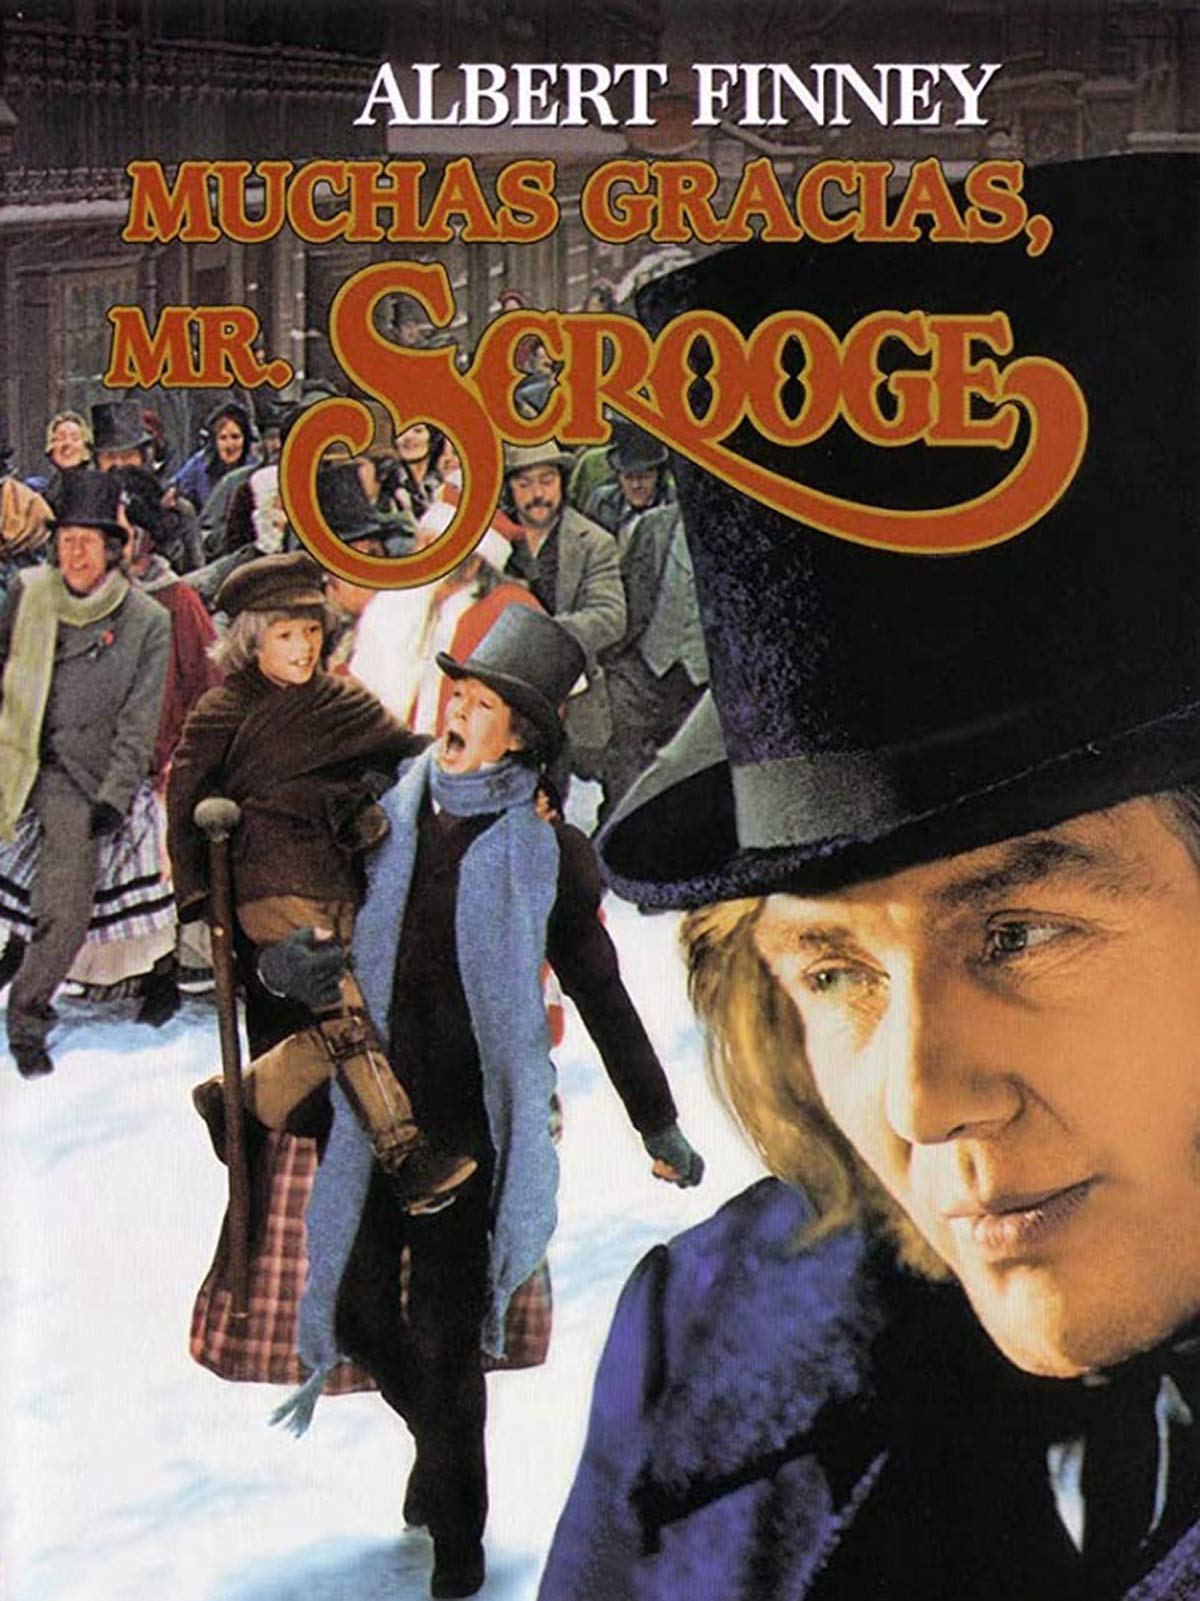 Best classic christmas movies - Scrooge